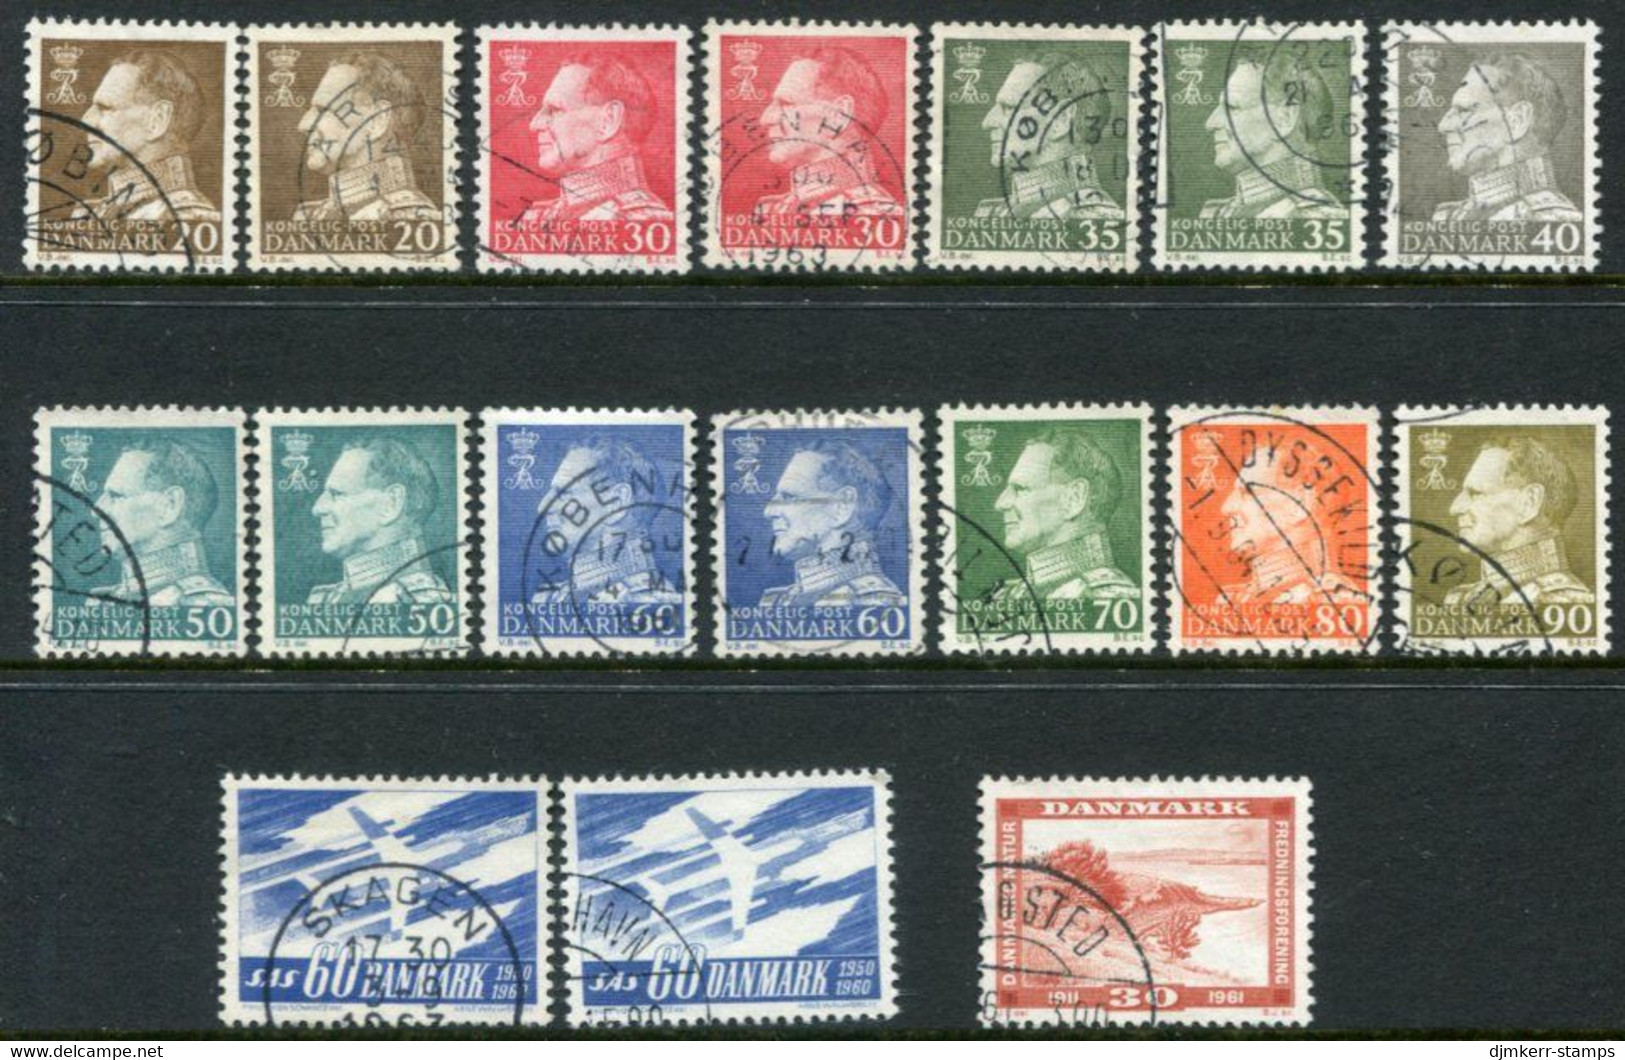 DENMARK 1961 Complete Issues With Ordinary And Fluorescent Papers, Used Michel 388-98 - Used Stamps